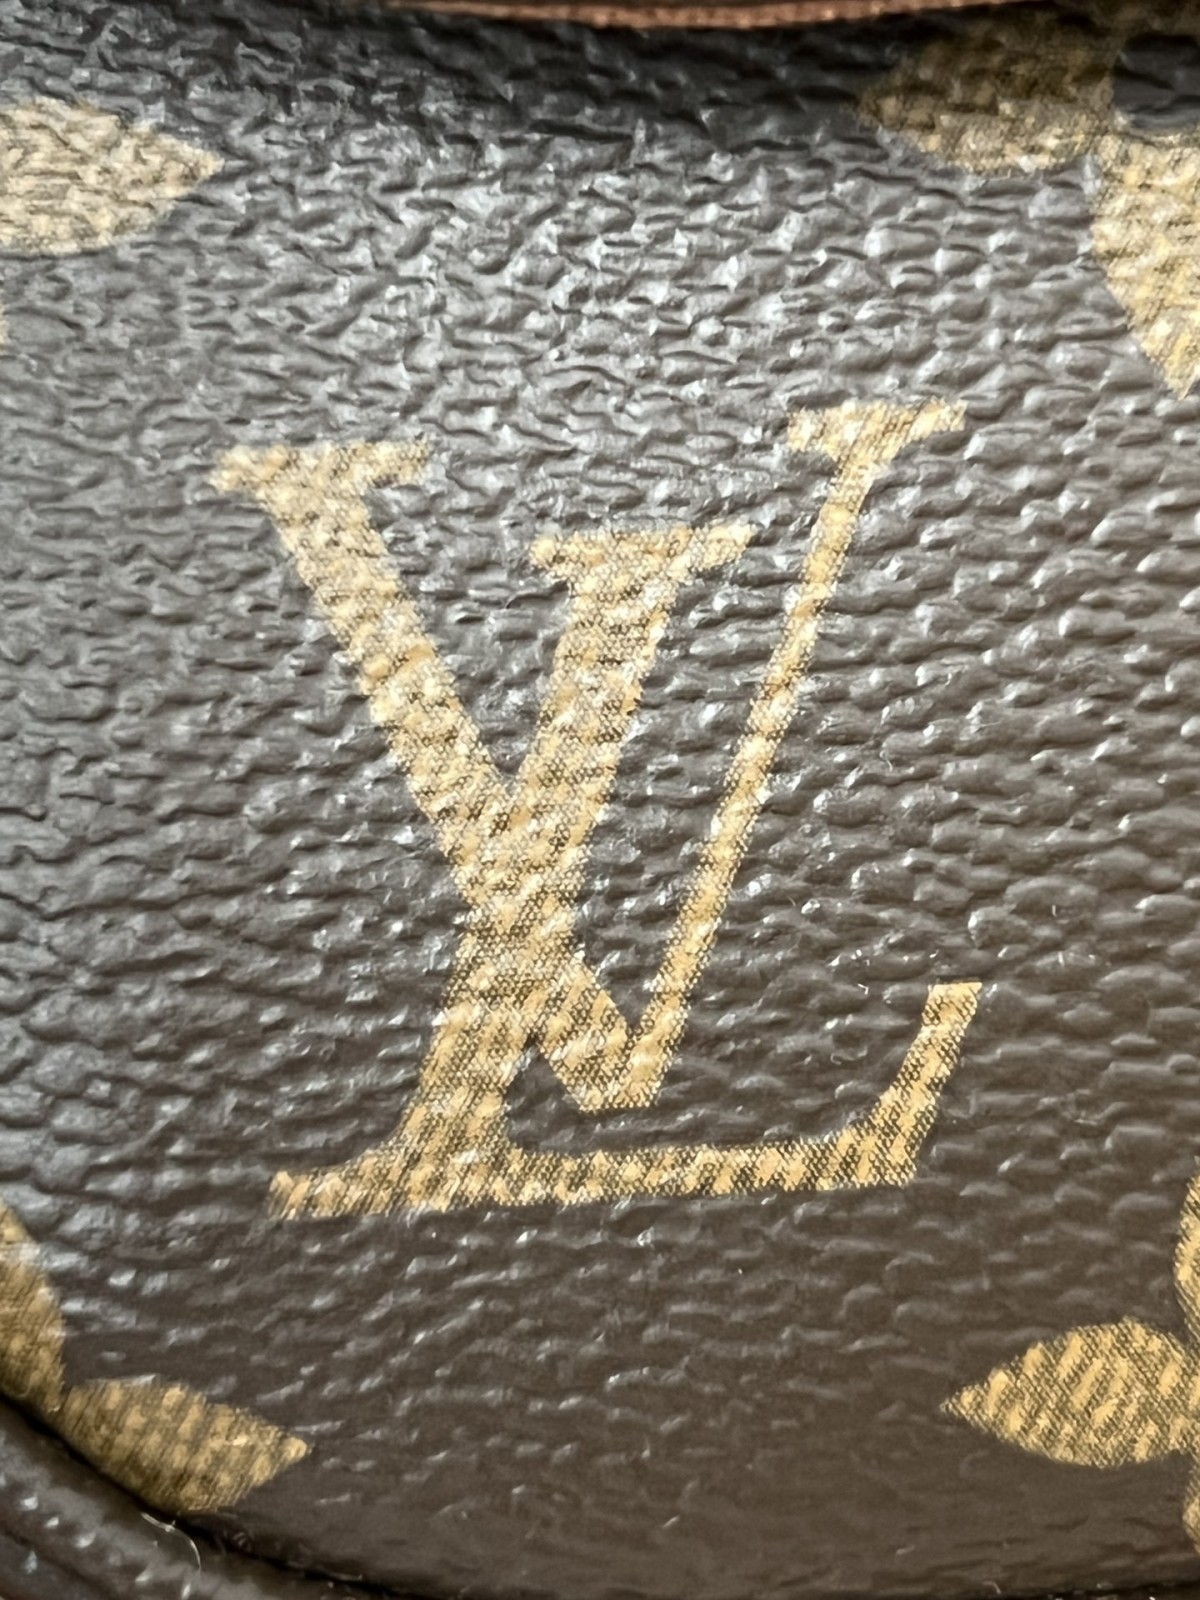 A Glance of Shebag workshop and warehouse for Louis Vuitton new WOC IVY bags of M81911（2024 Week 10）-Best Quality adịgboroja Louis vuitton akpa Online Store, oyiri mmebe akpa ru